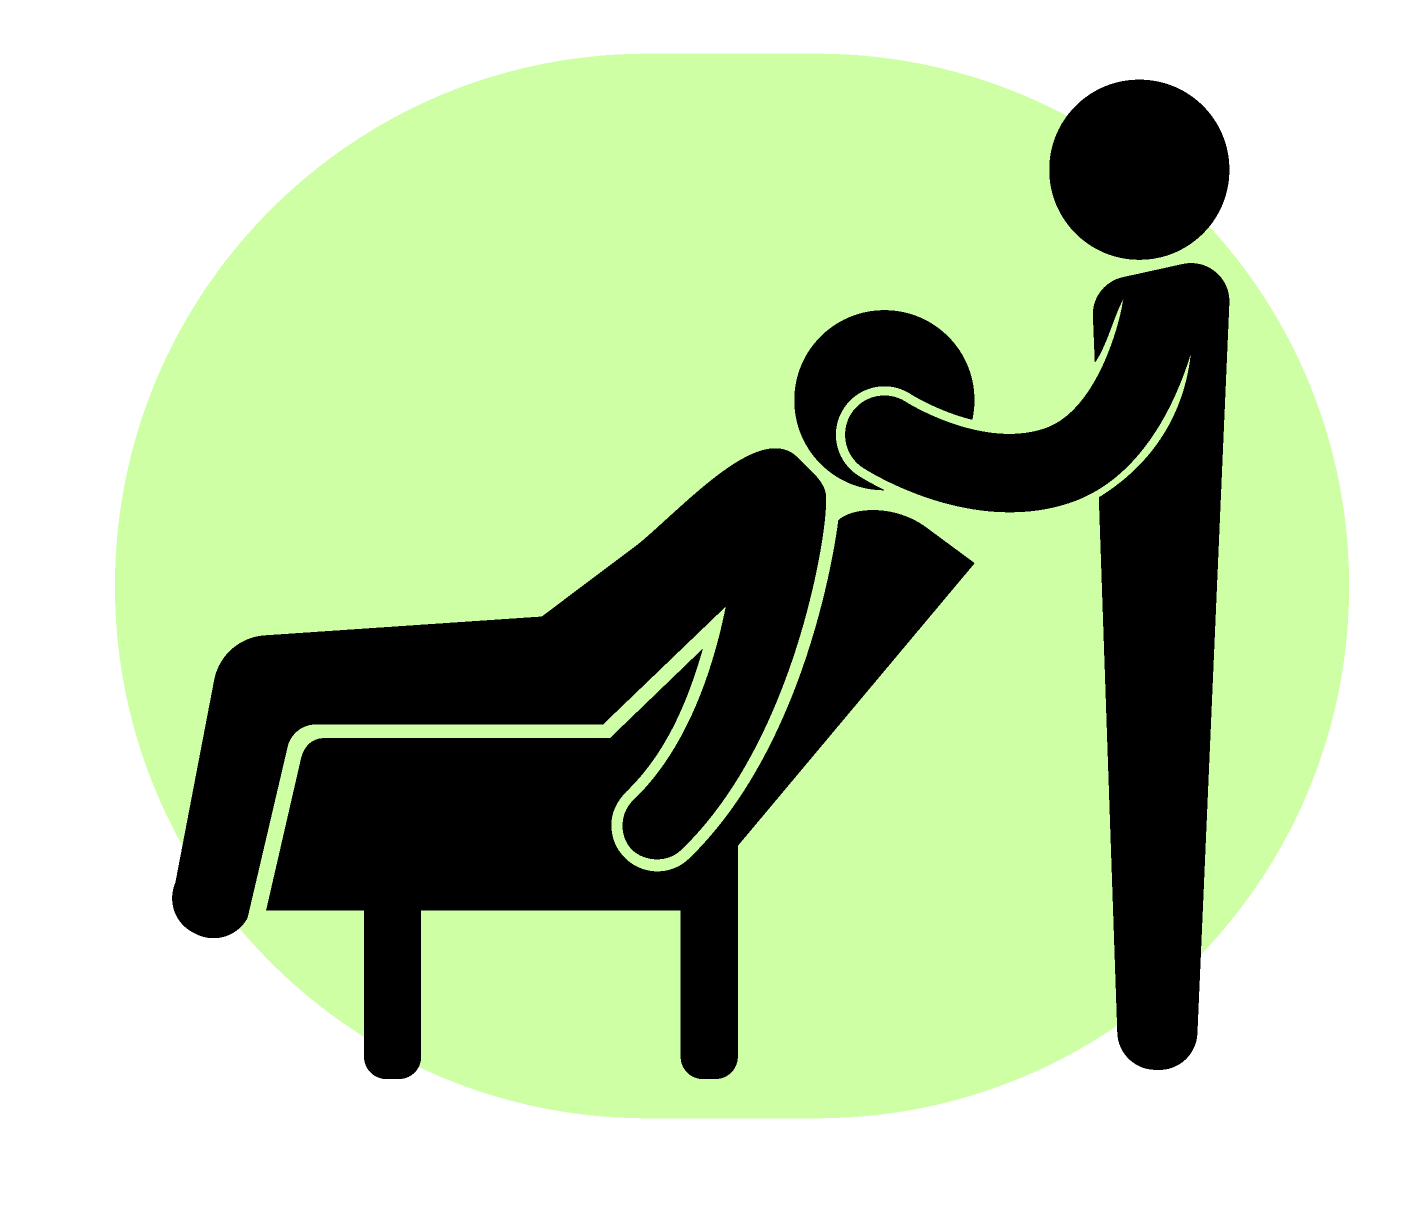 Massages clipart workplace. Massage therapy services stress